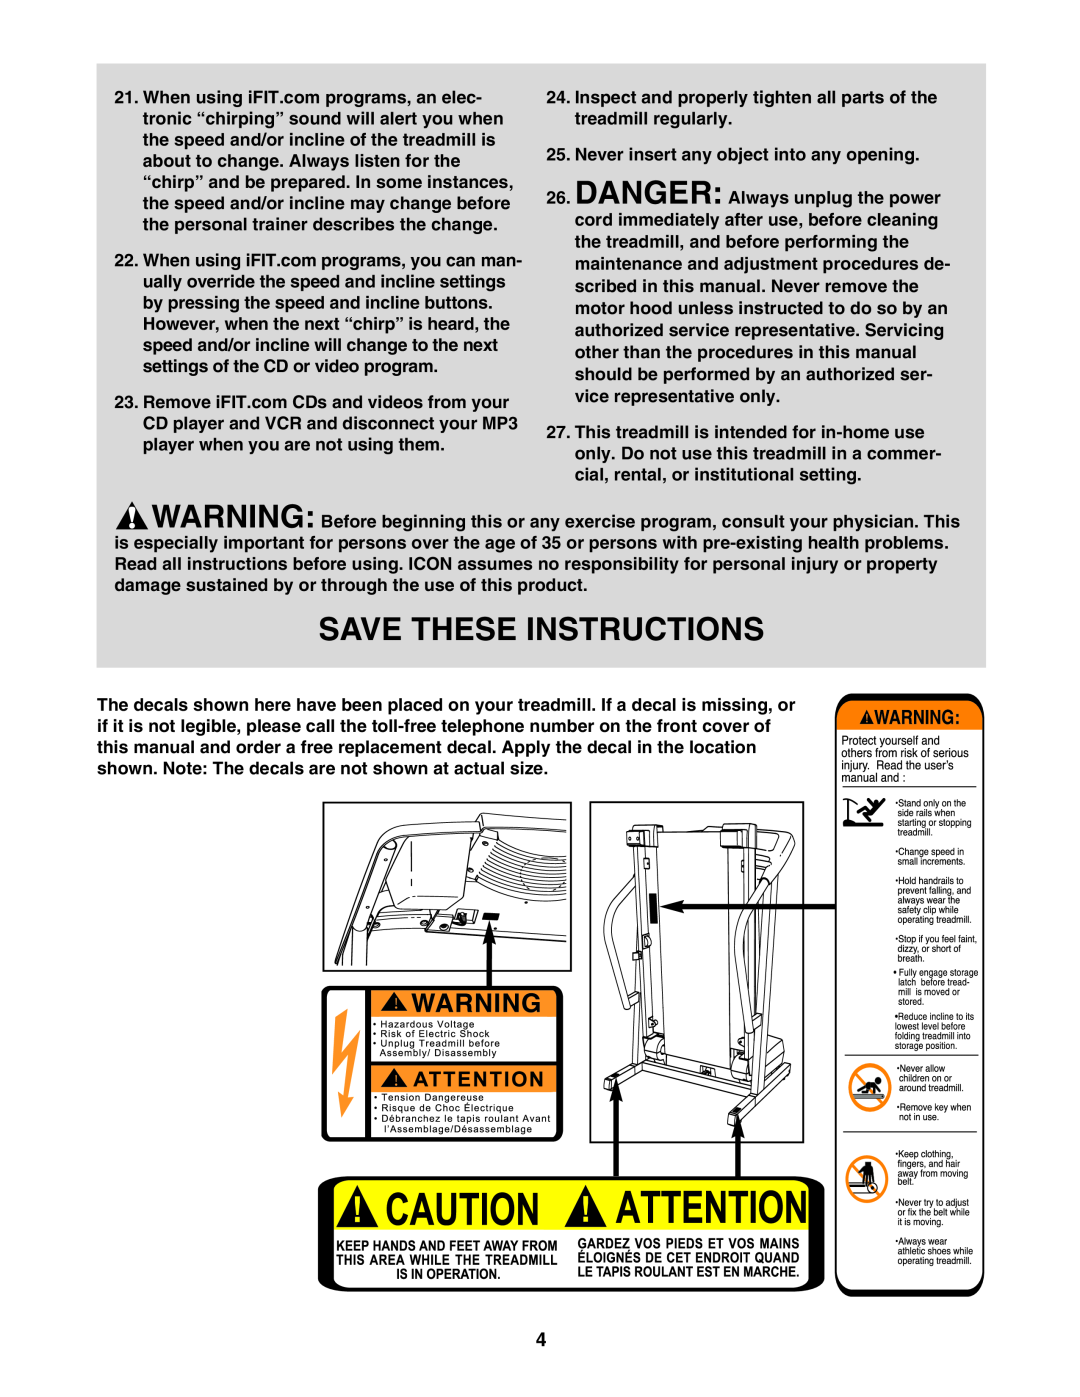 ProForm 30514.0 user manual Save These Instructions, Inspect and properly tighten all parts of the treadmill regularly 